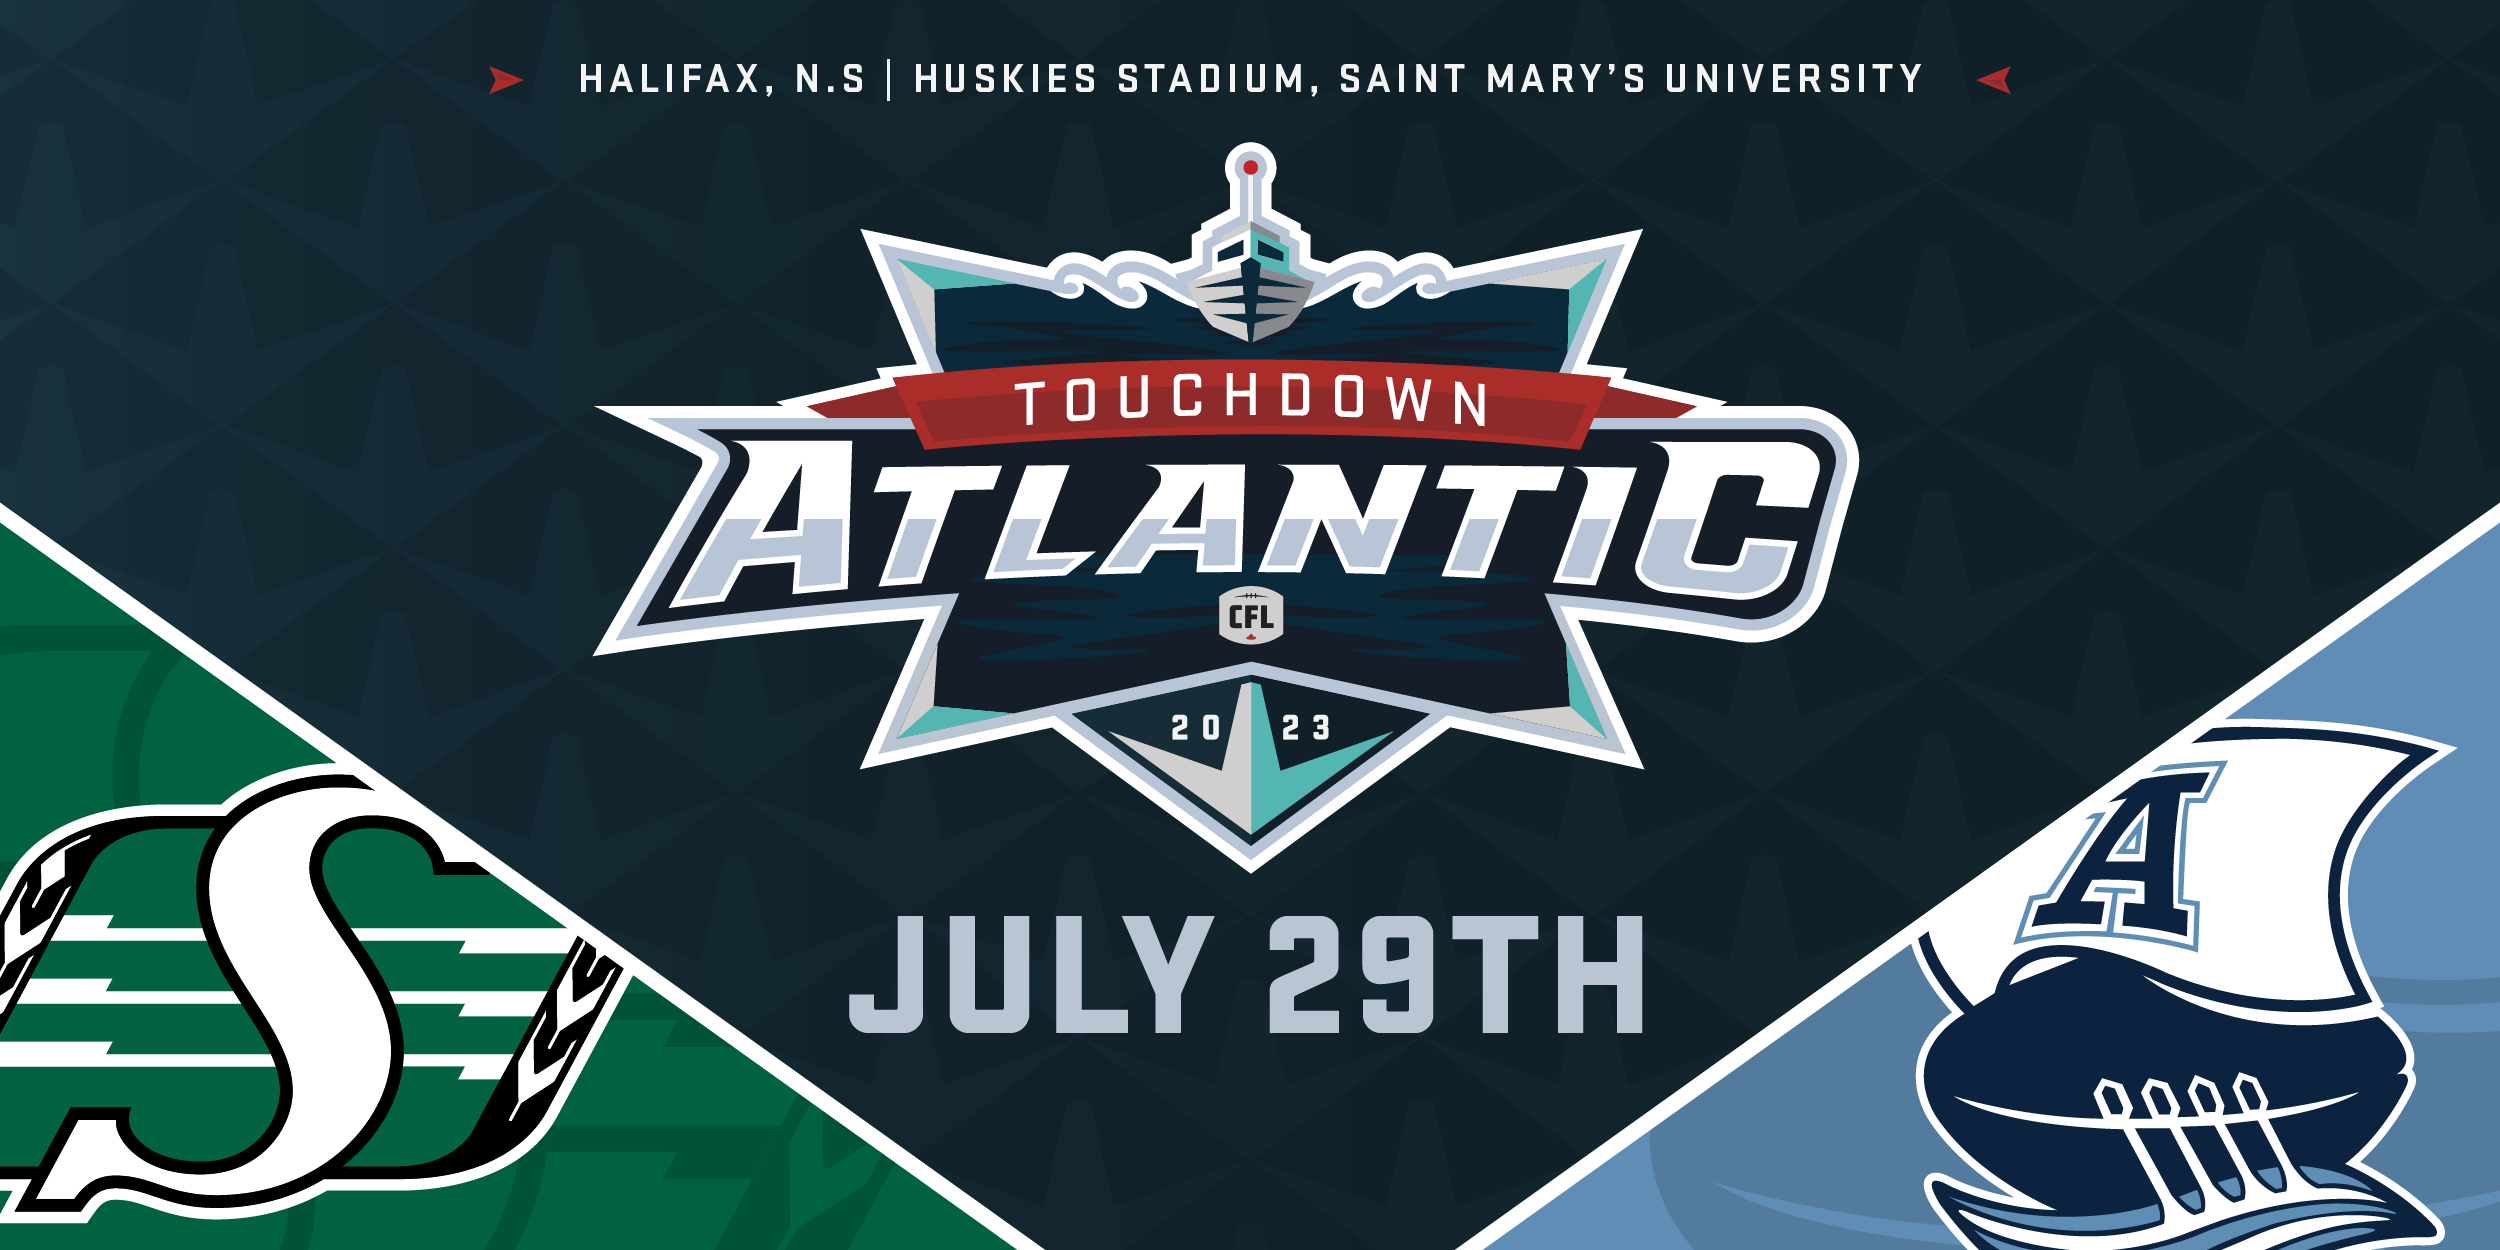 Touchdown Atlantic Returns In 2023, July 29 at Saint Mary’s University in Halifax